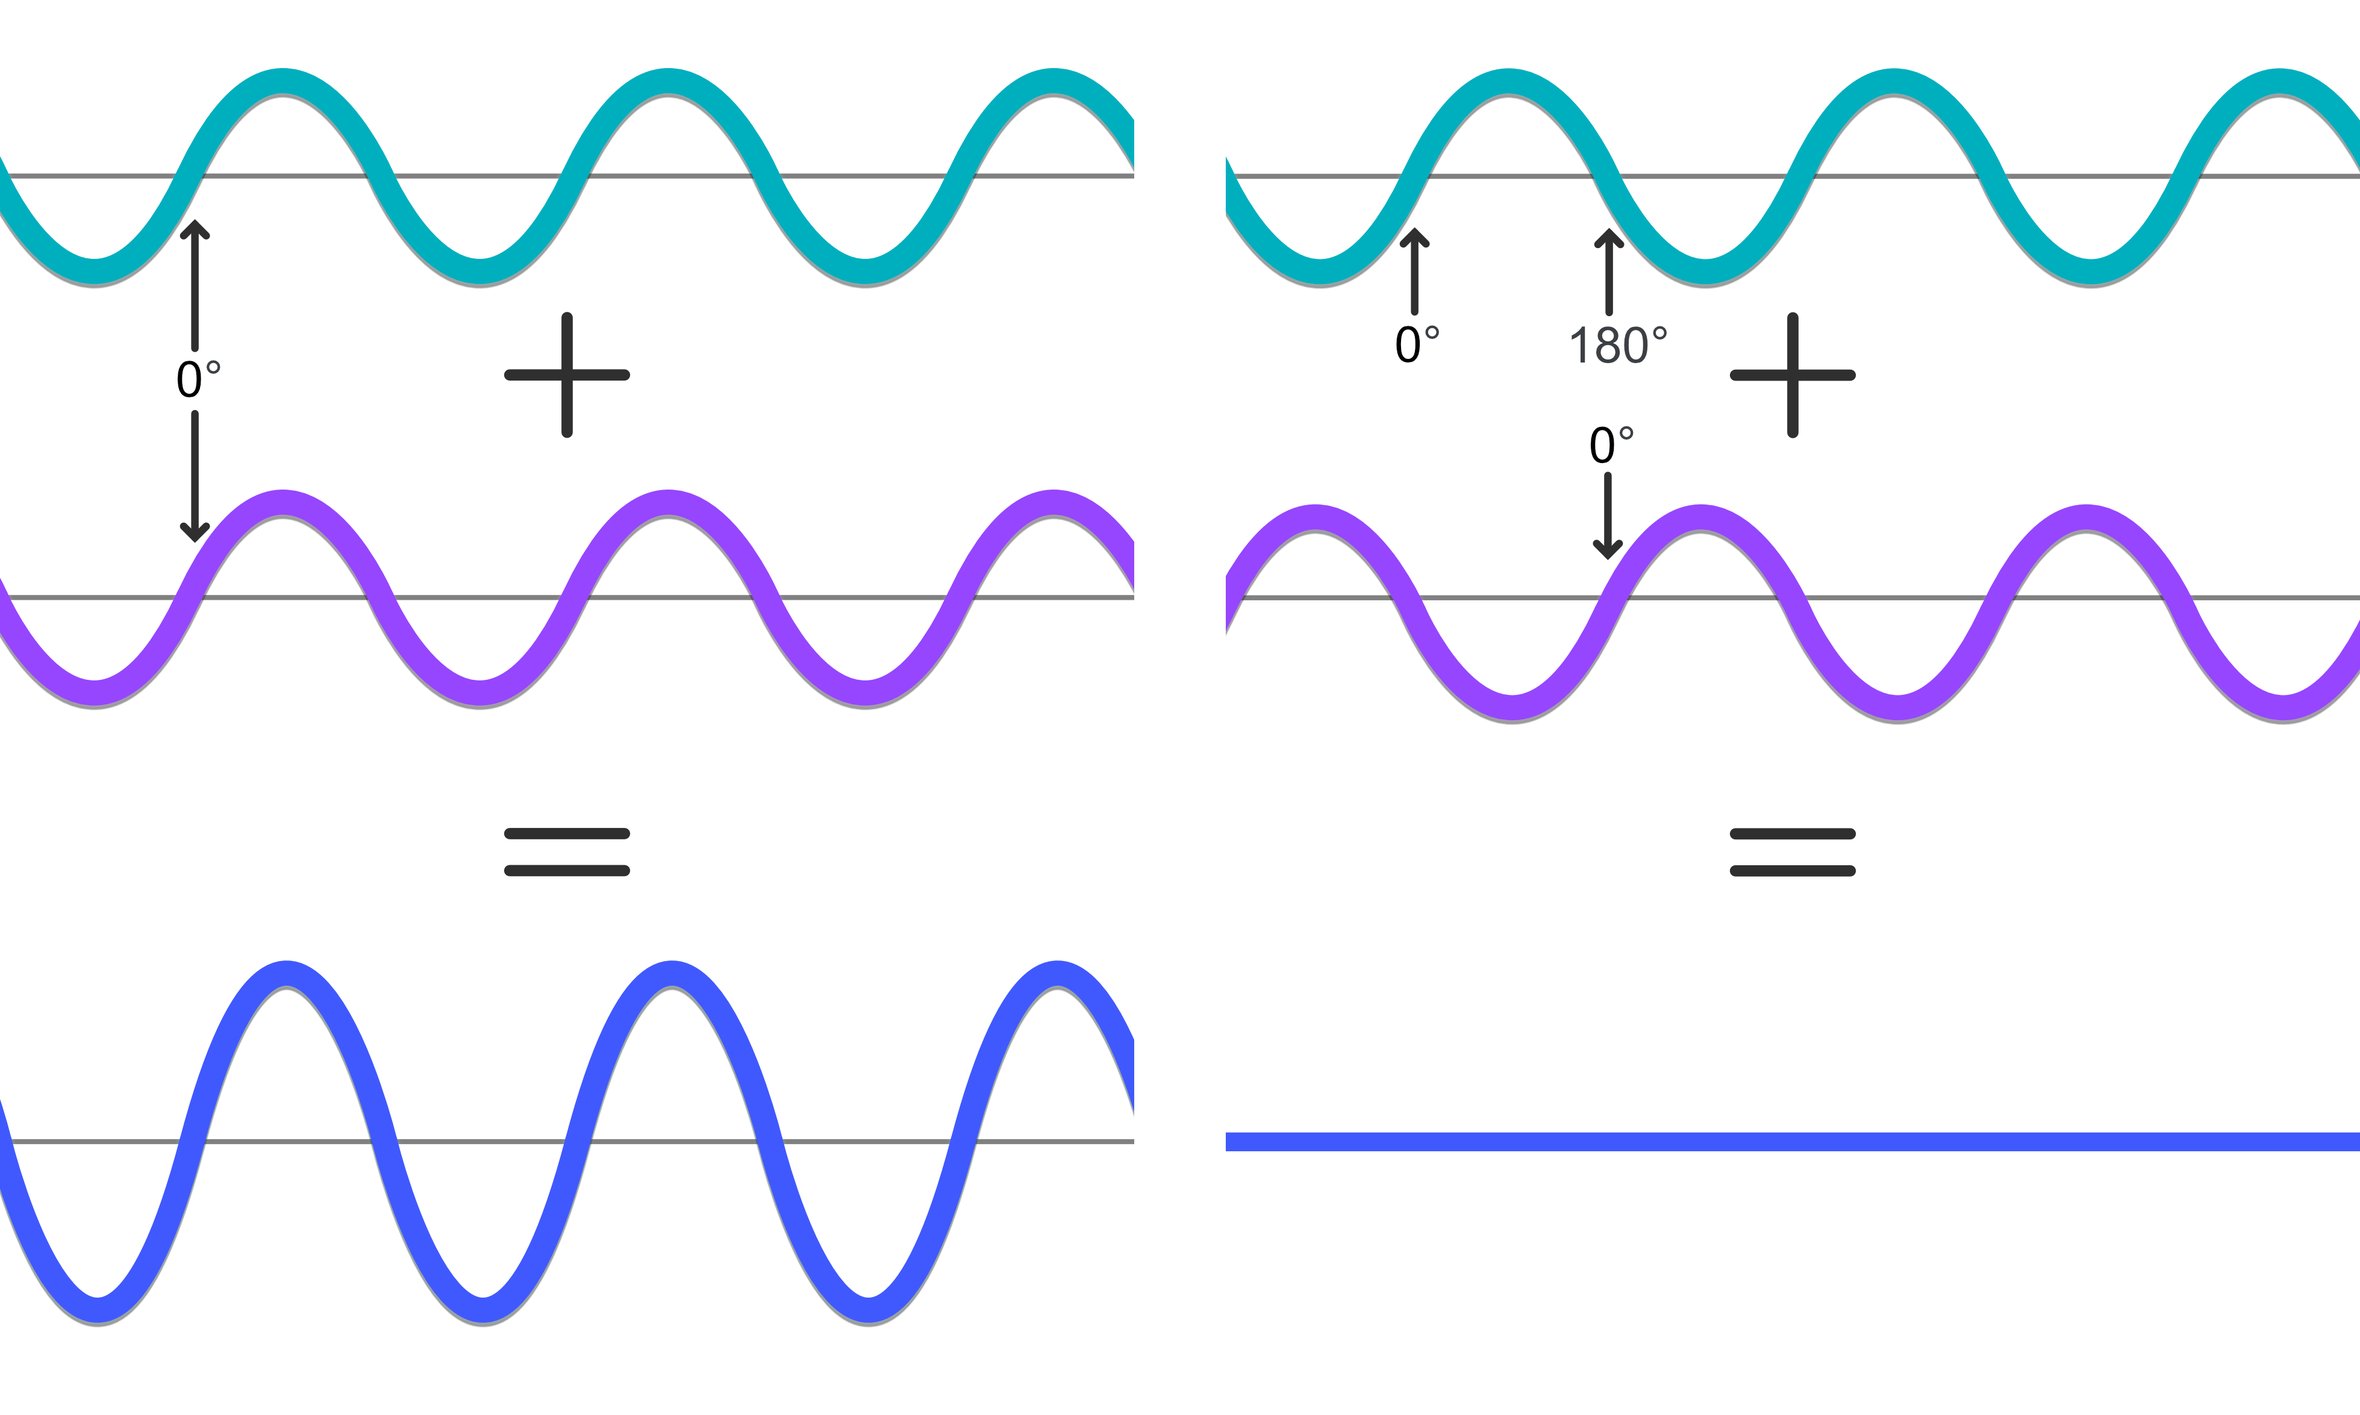 two waves inverted with respect to each other canceling each other and two waves adding together